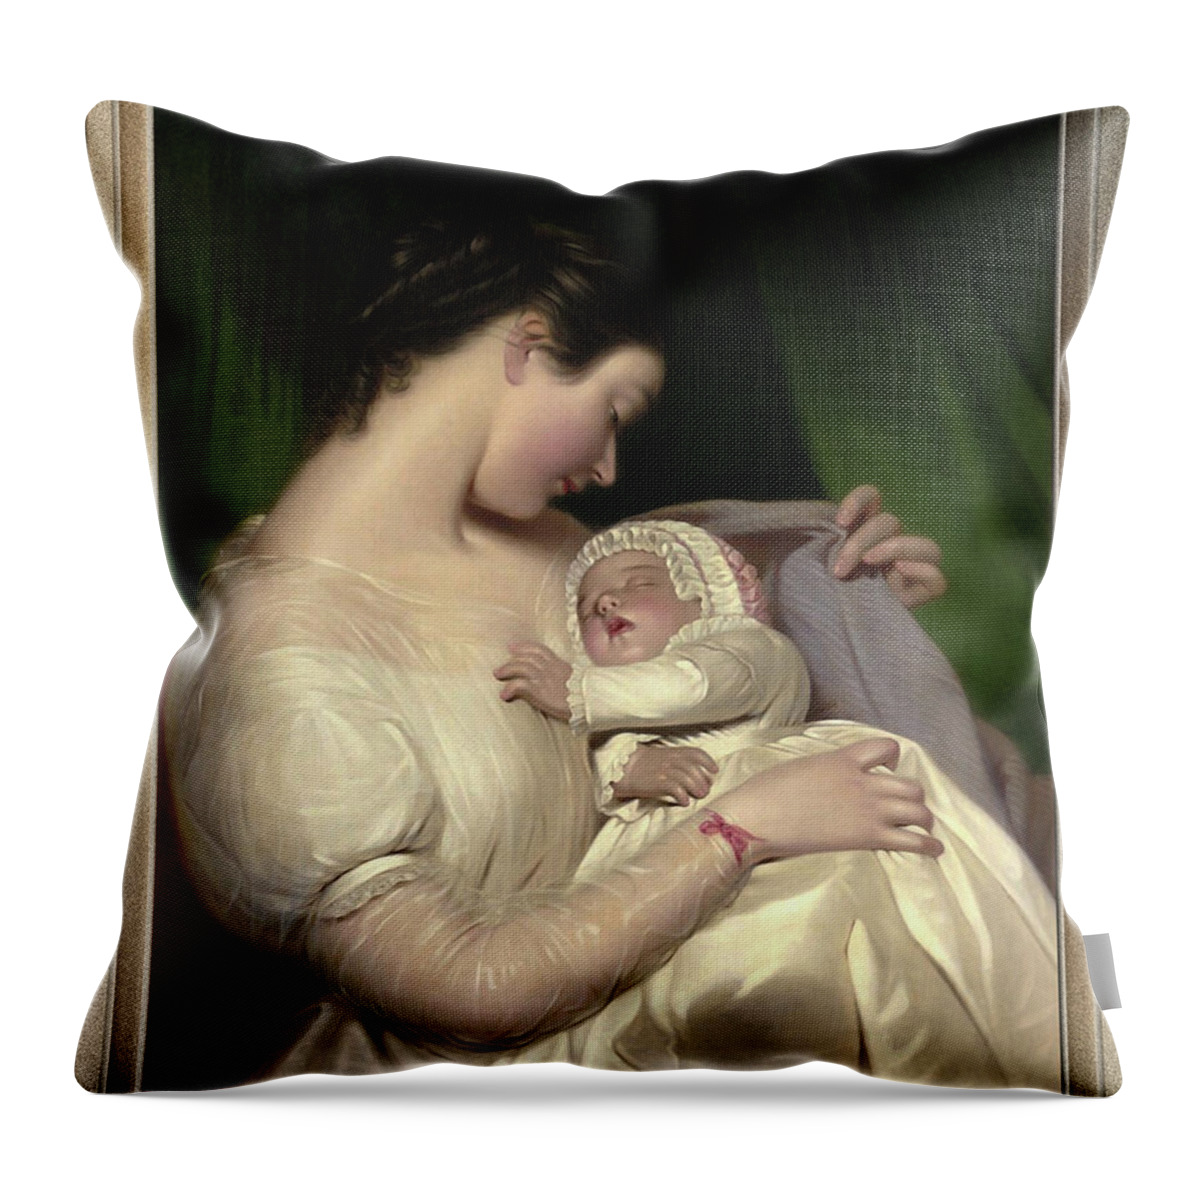 Elizabeth Sant Throw Pillow featuring the painting James Sant's Wife Elizabeth With Their Daughter Mary Edith by James Sant by Rolando Burbon